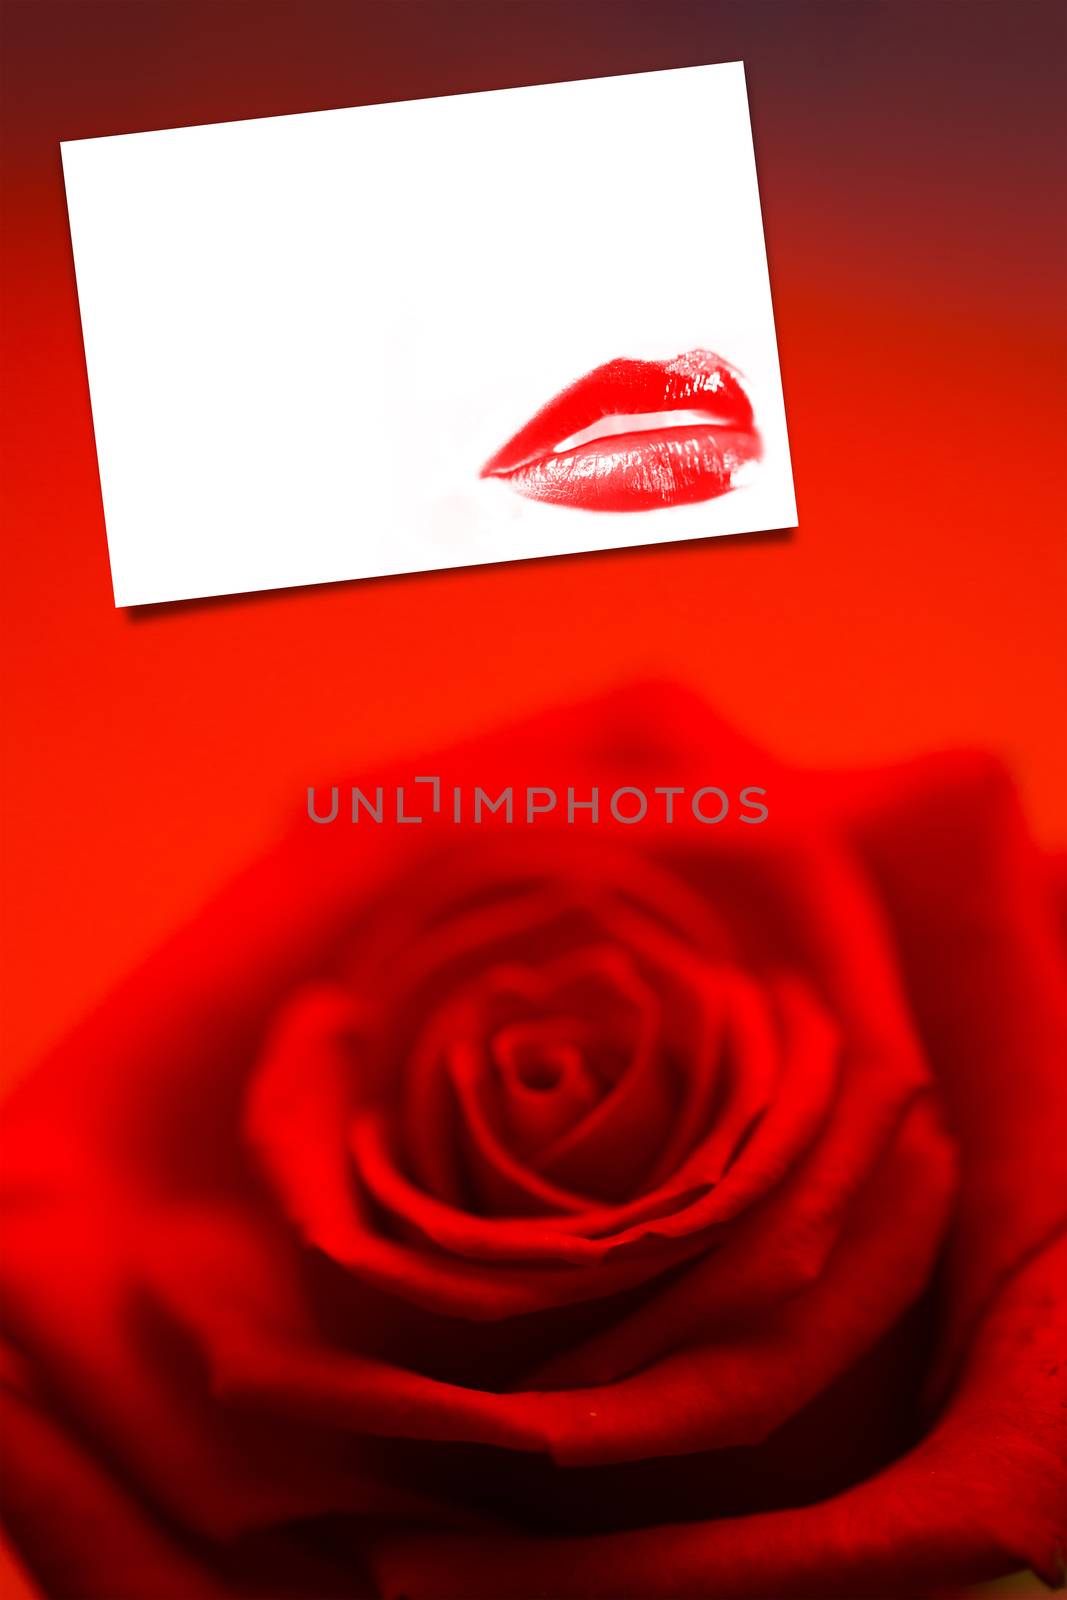 Blurred red rose against white card